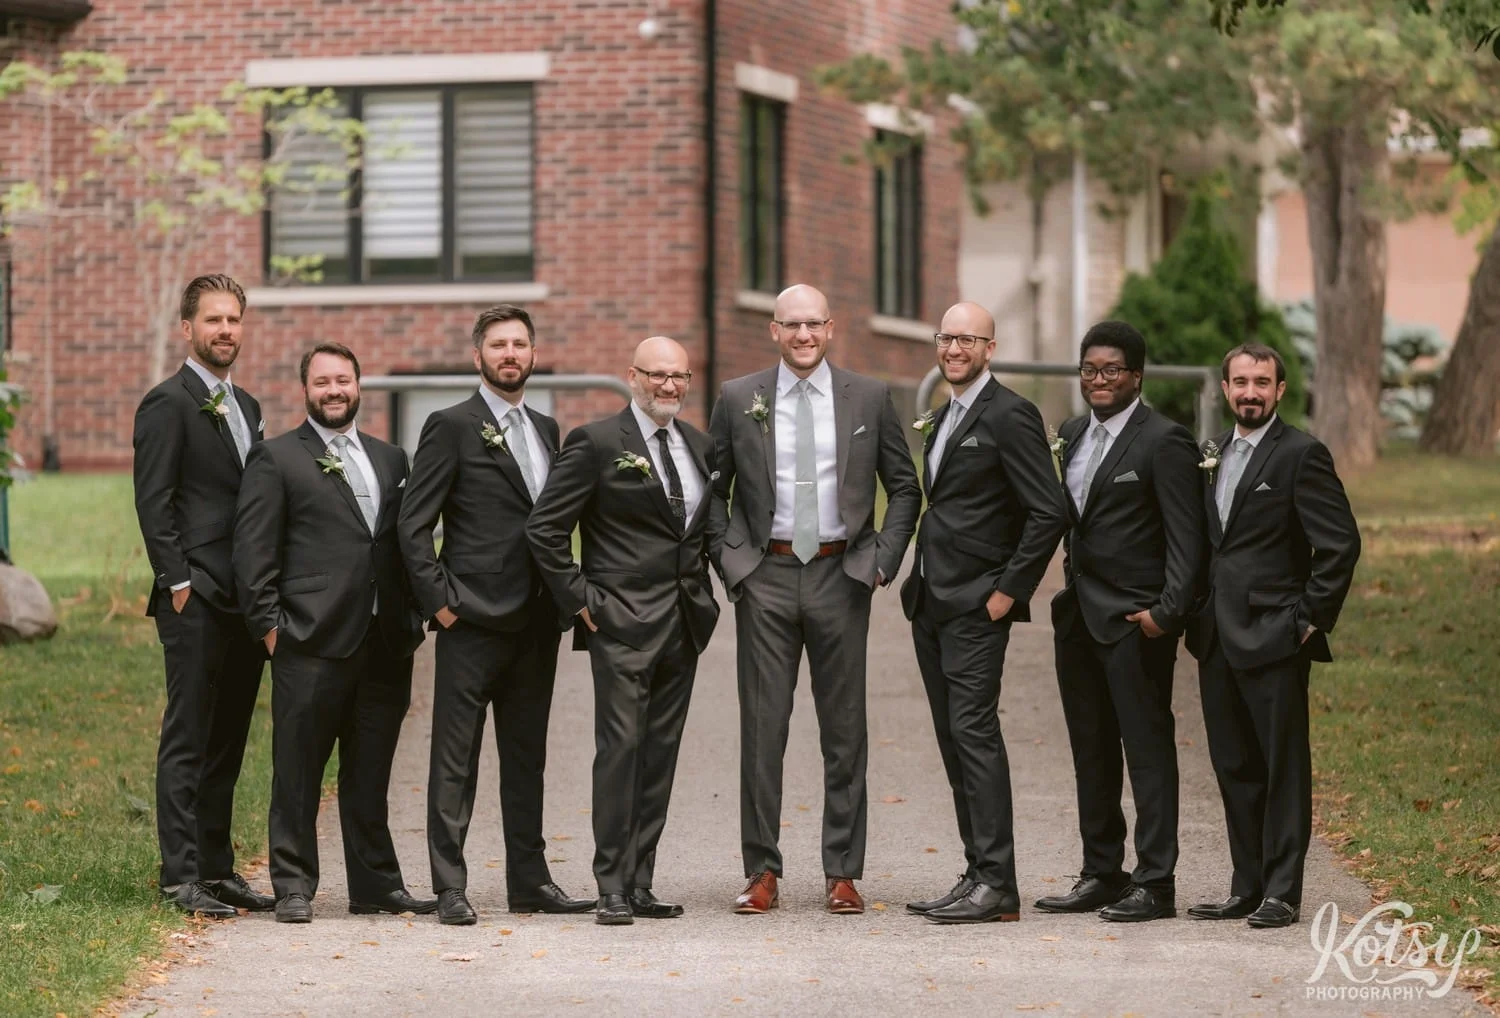 A shot of a groom and his seven groomsmen posing for a group shot on a pathway at West Deane Park in Toronto, Canada